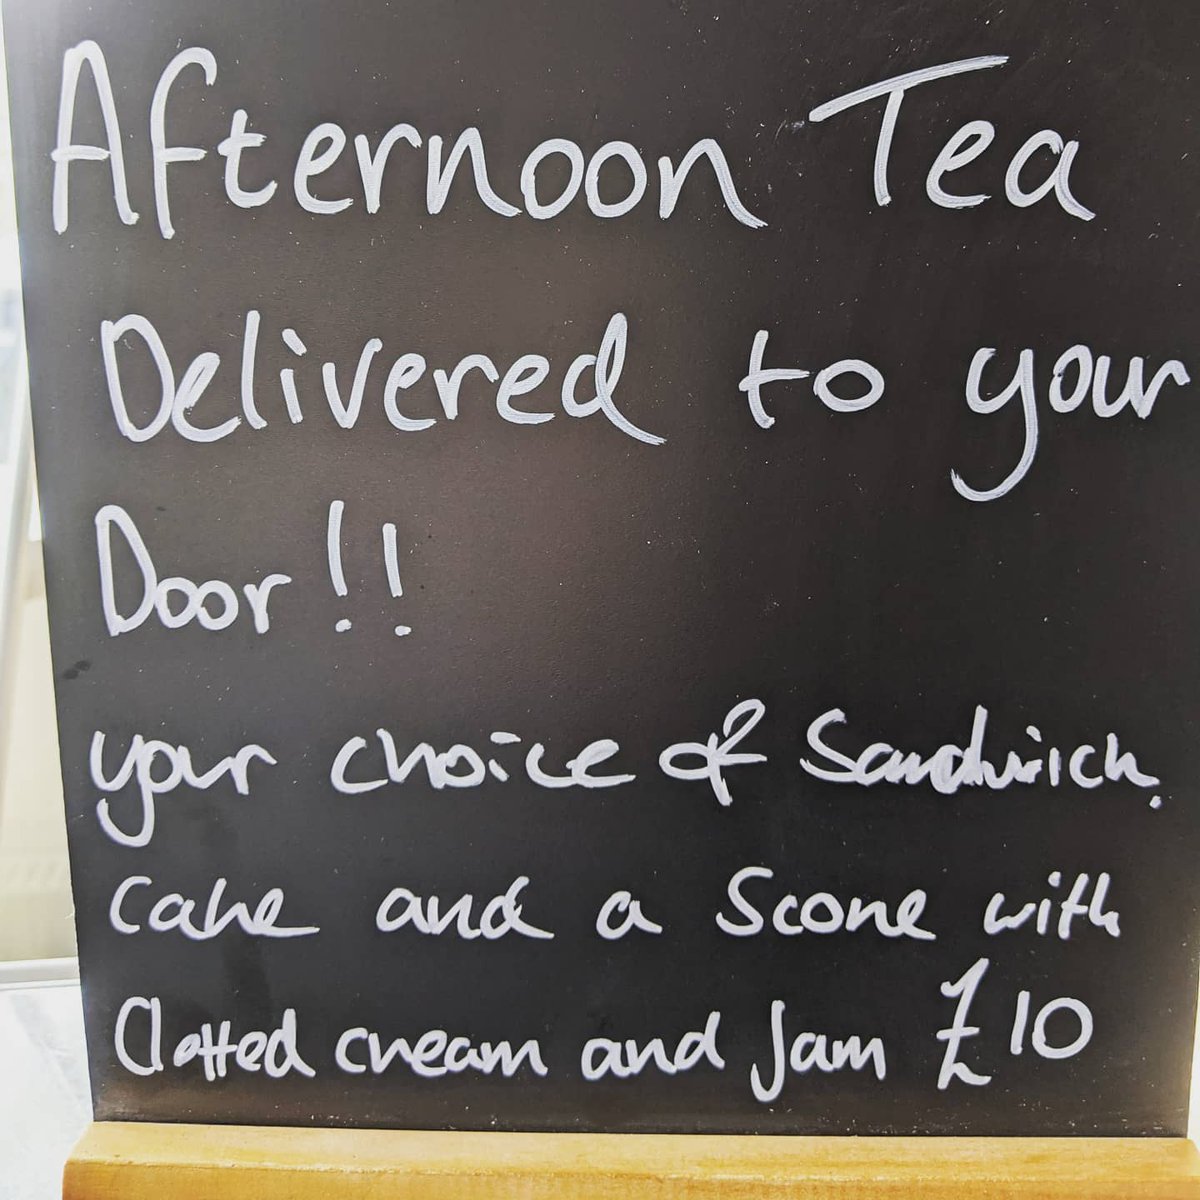 We're getting pretty booked up for Afternoon Tea's this week so if you would like to surprise your family and friends get in quick to avoid disappointment. #afternoontea #localdeliveryavailable🚗 #horsforth #andsurroundingareas #horsforthtownstreet #leedscoffeeshops #leeds